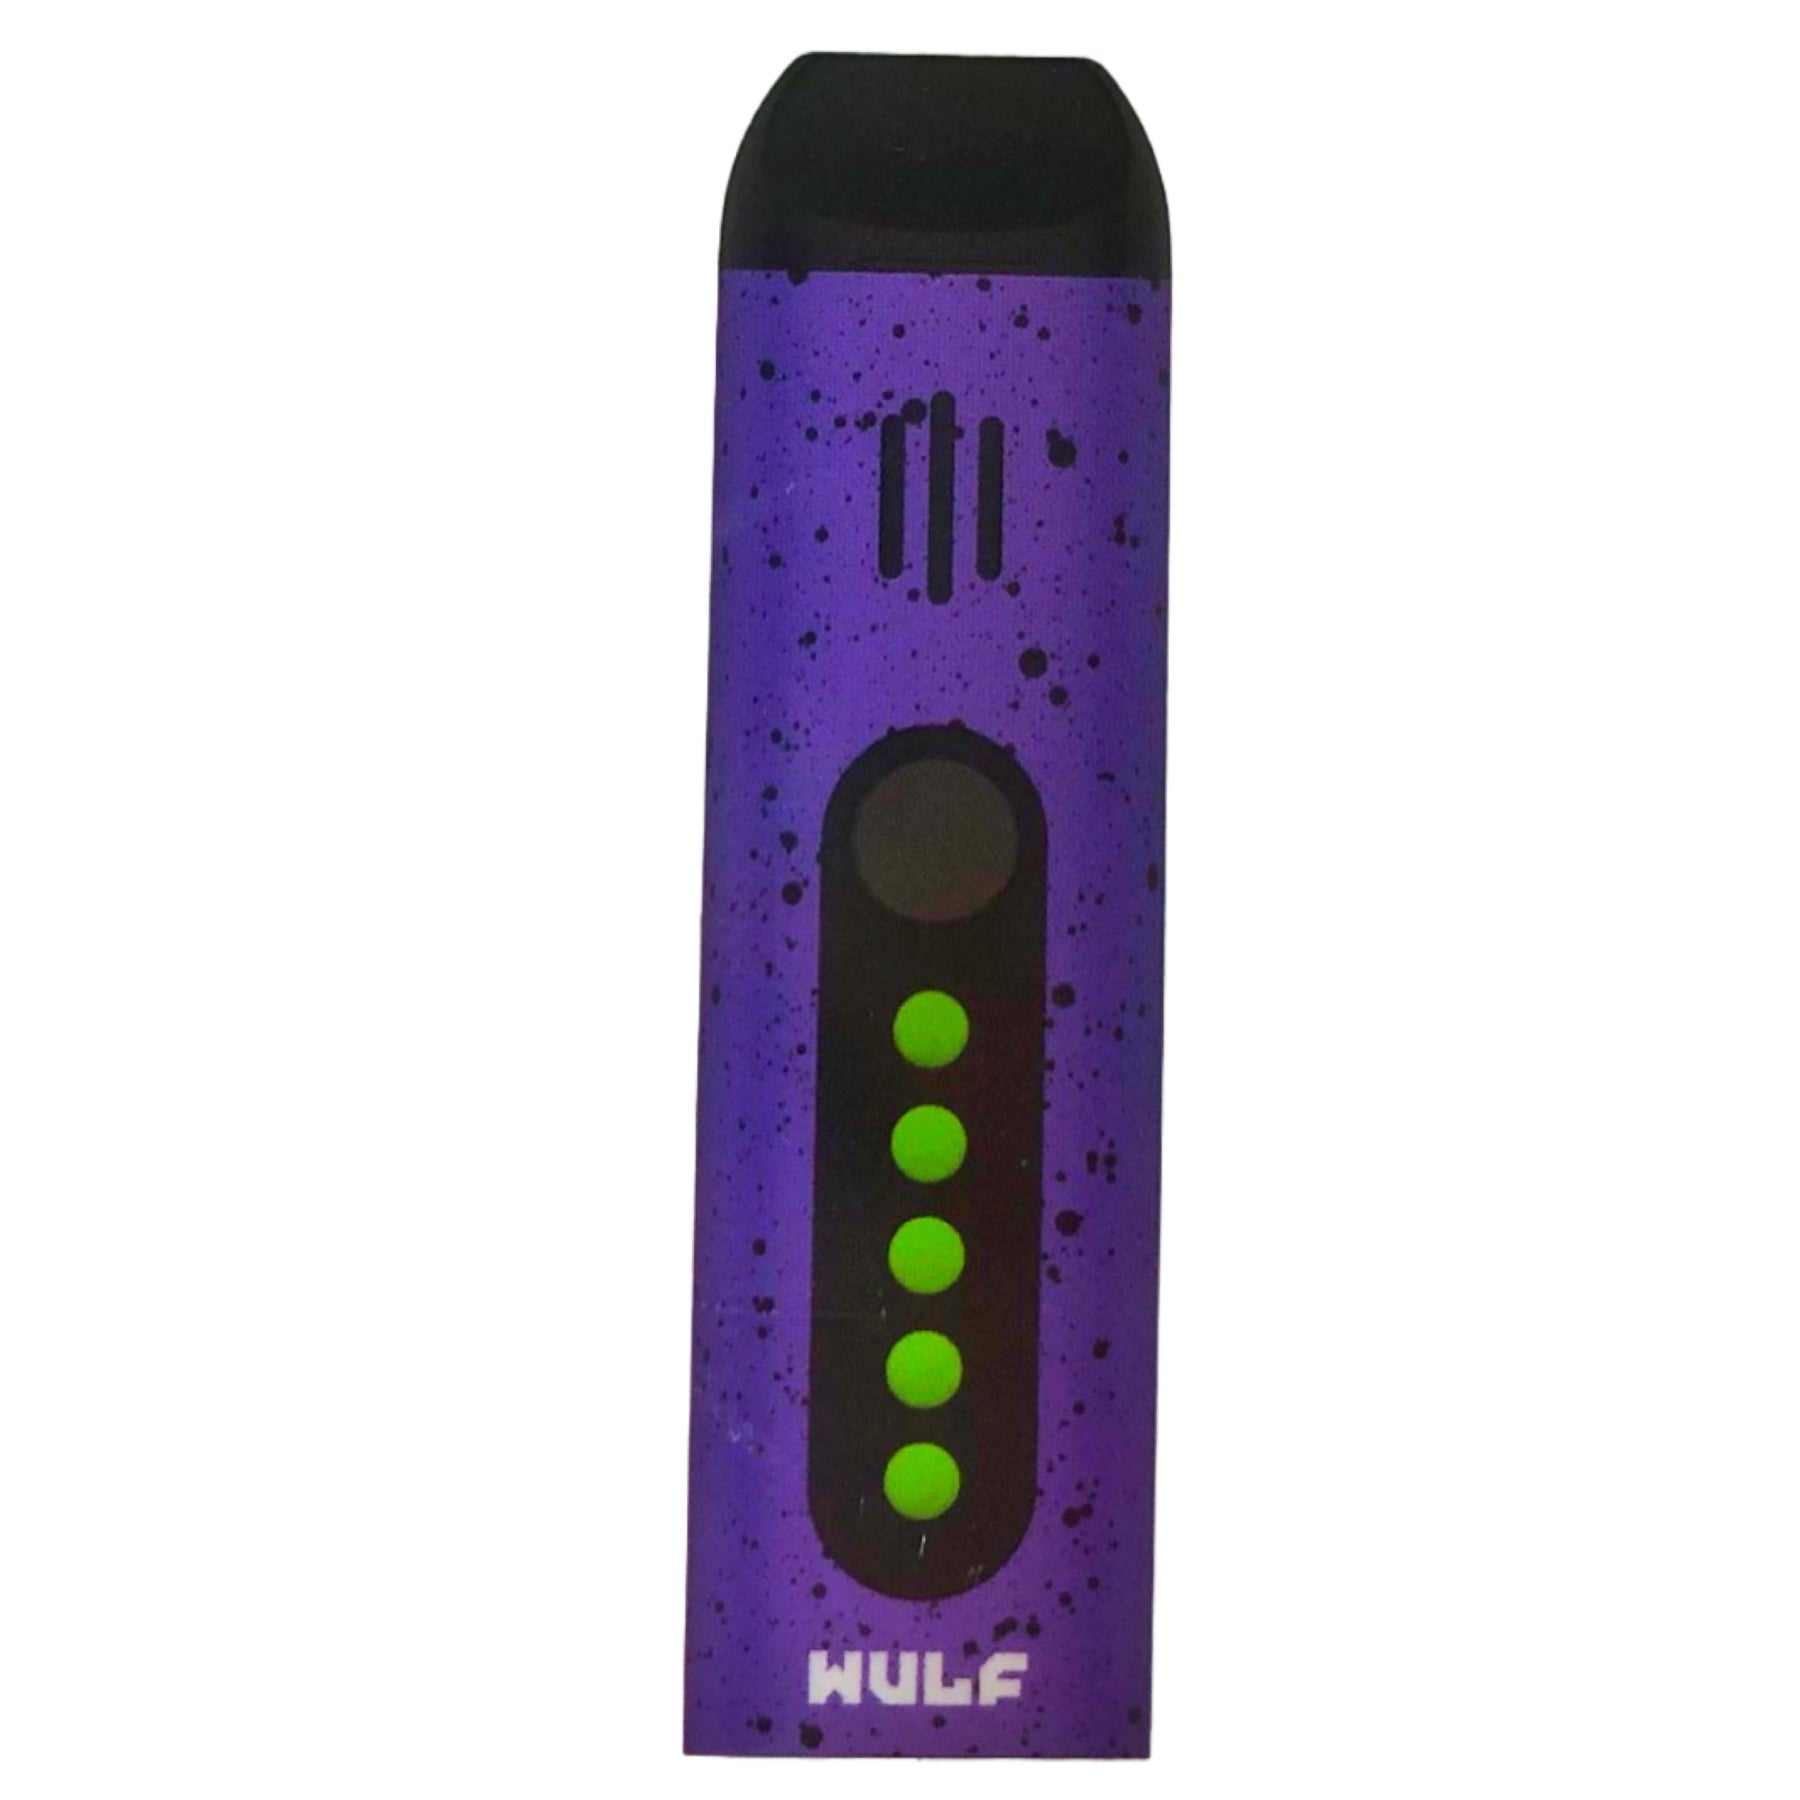 Wulf Flora Dry Herb Vaporizer Color Purple and Green